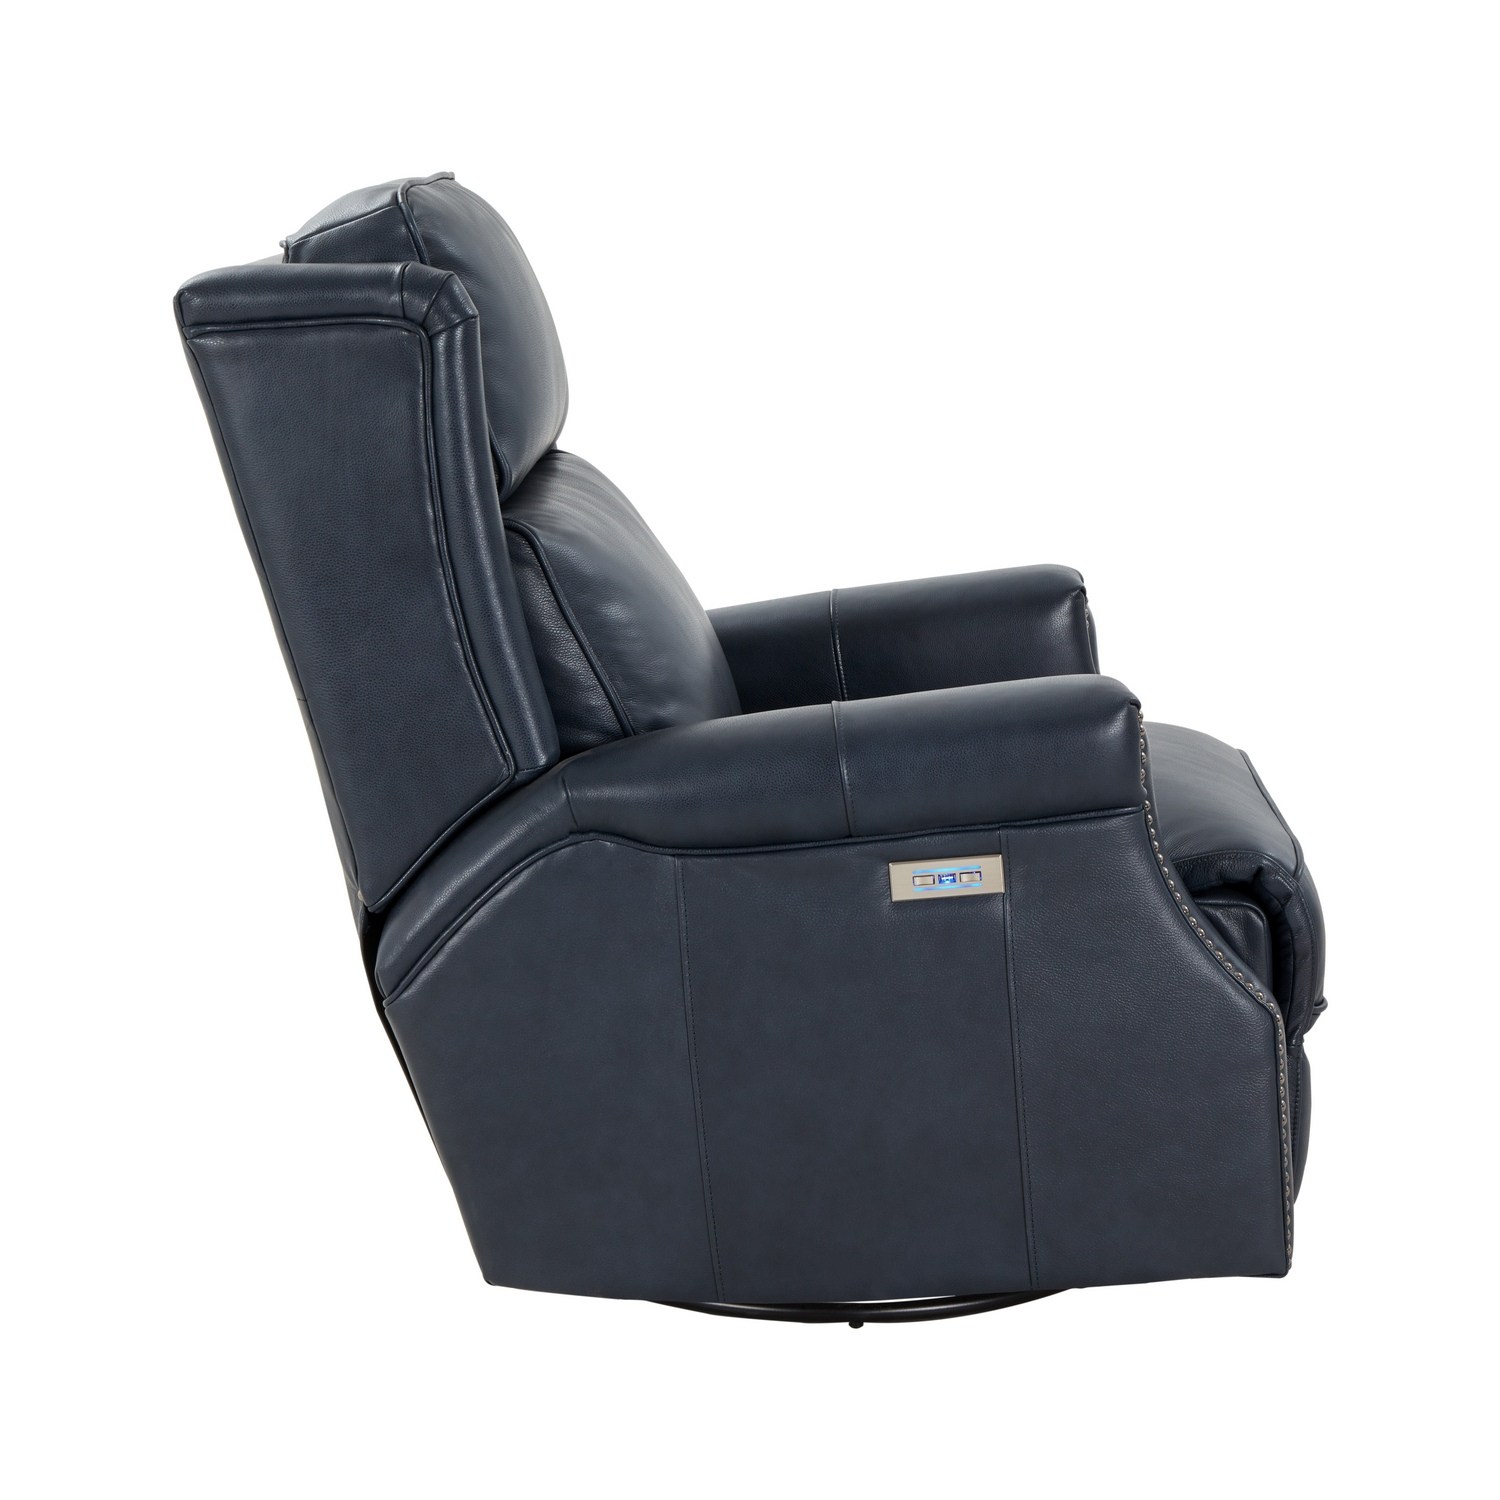 Barcalounger Brookmore Swivel Glider Recliner Chair with Power Recline and Power Head Rest - Barone Navy Blue/All Leather